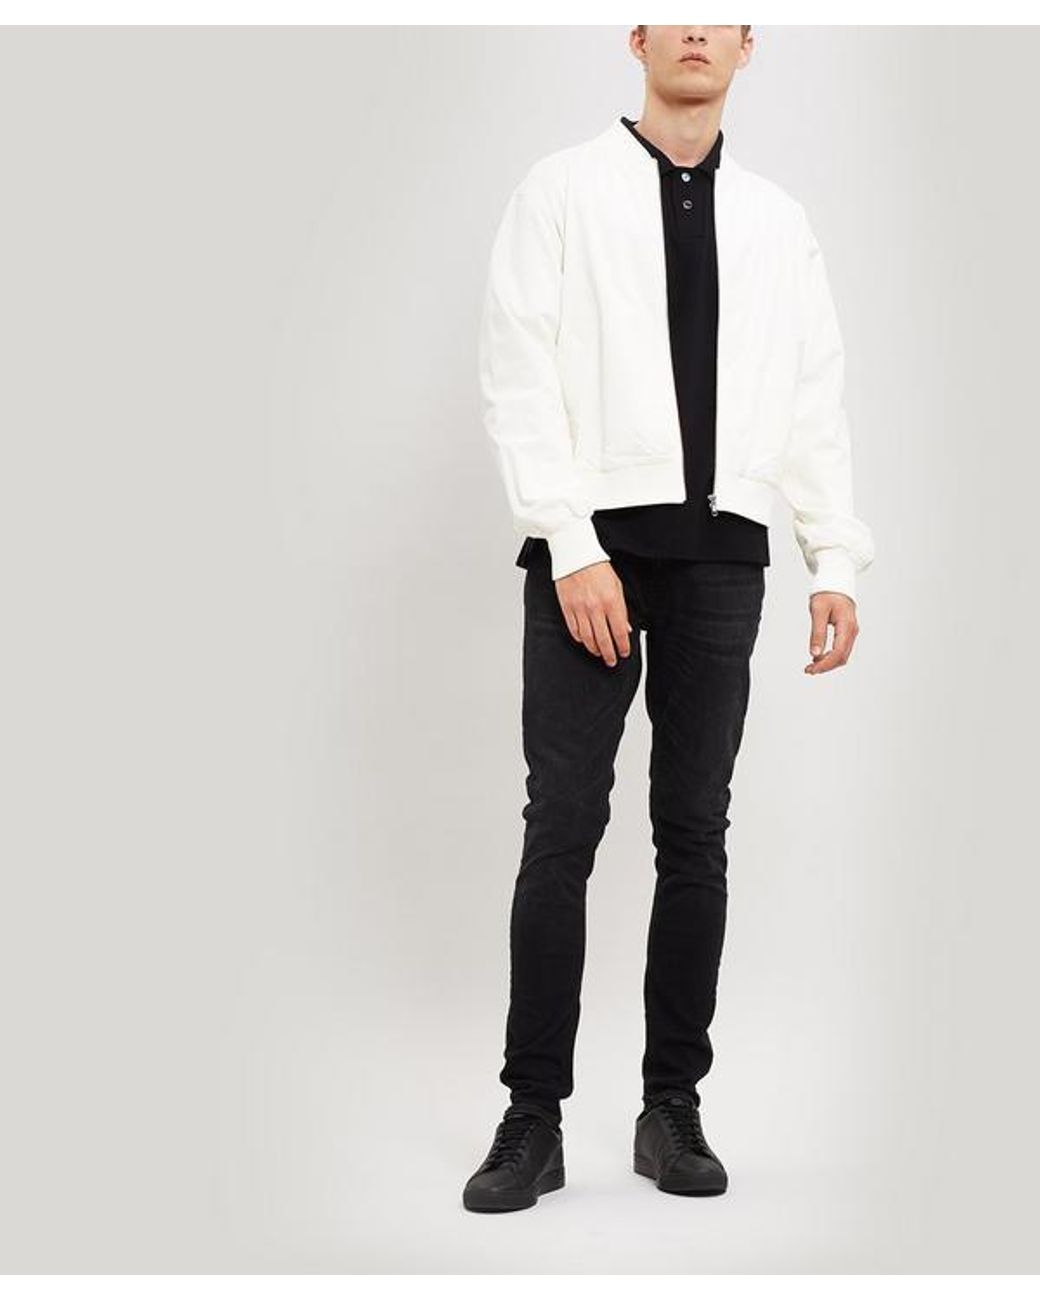 Fred Perry Margaret Howell Cotton Twill Bomber Jacket in White for Men |  Lyst